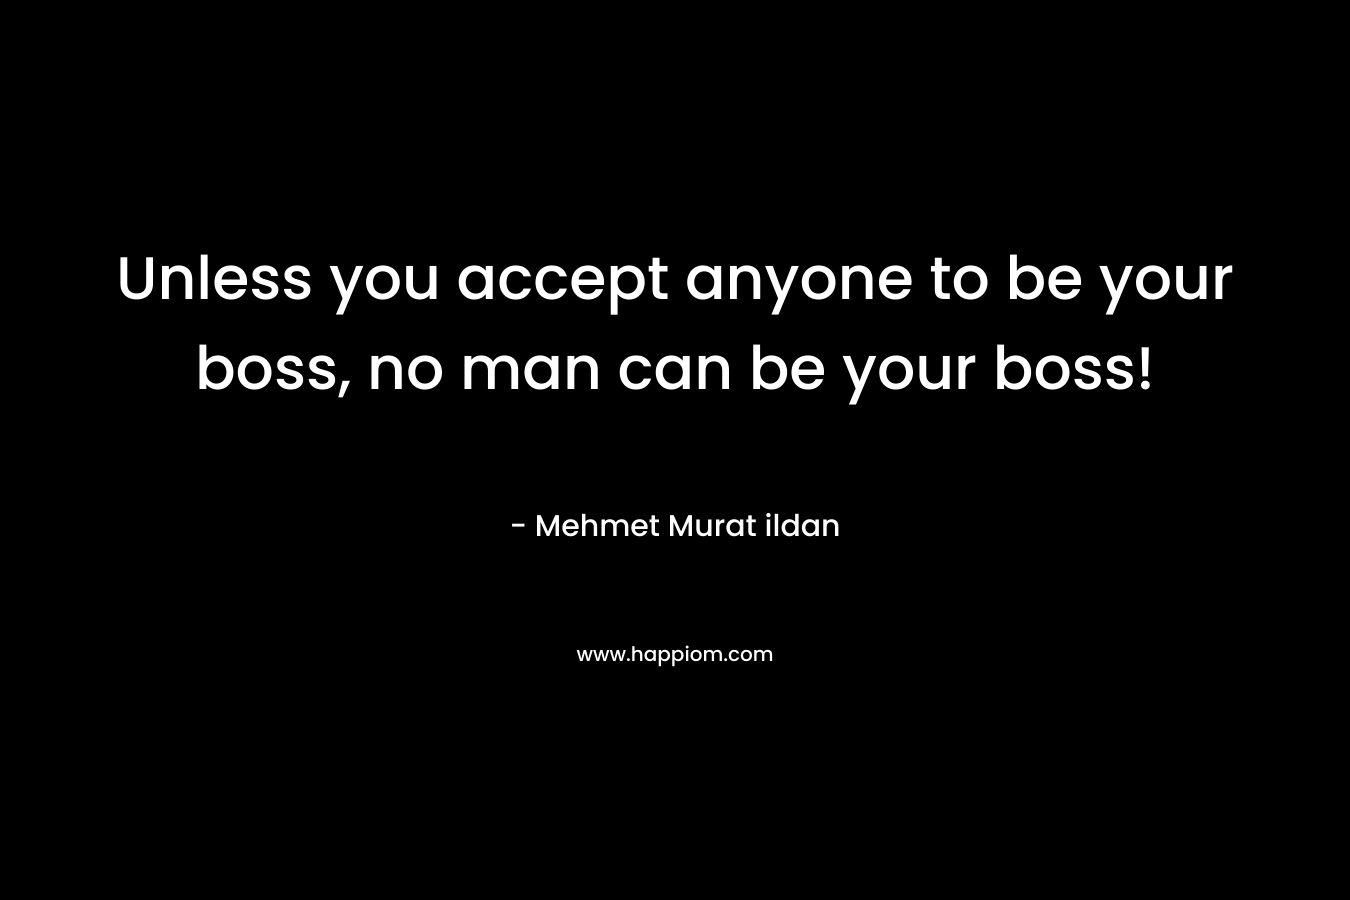 Unless you accept anyone to be your boss, no man can be your boss!